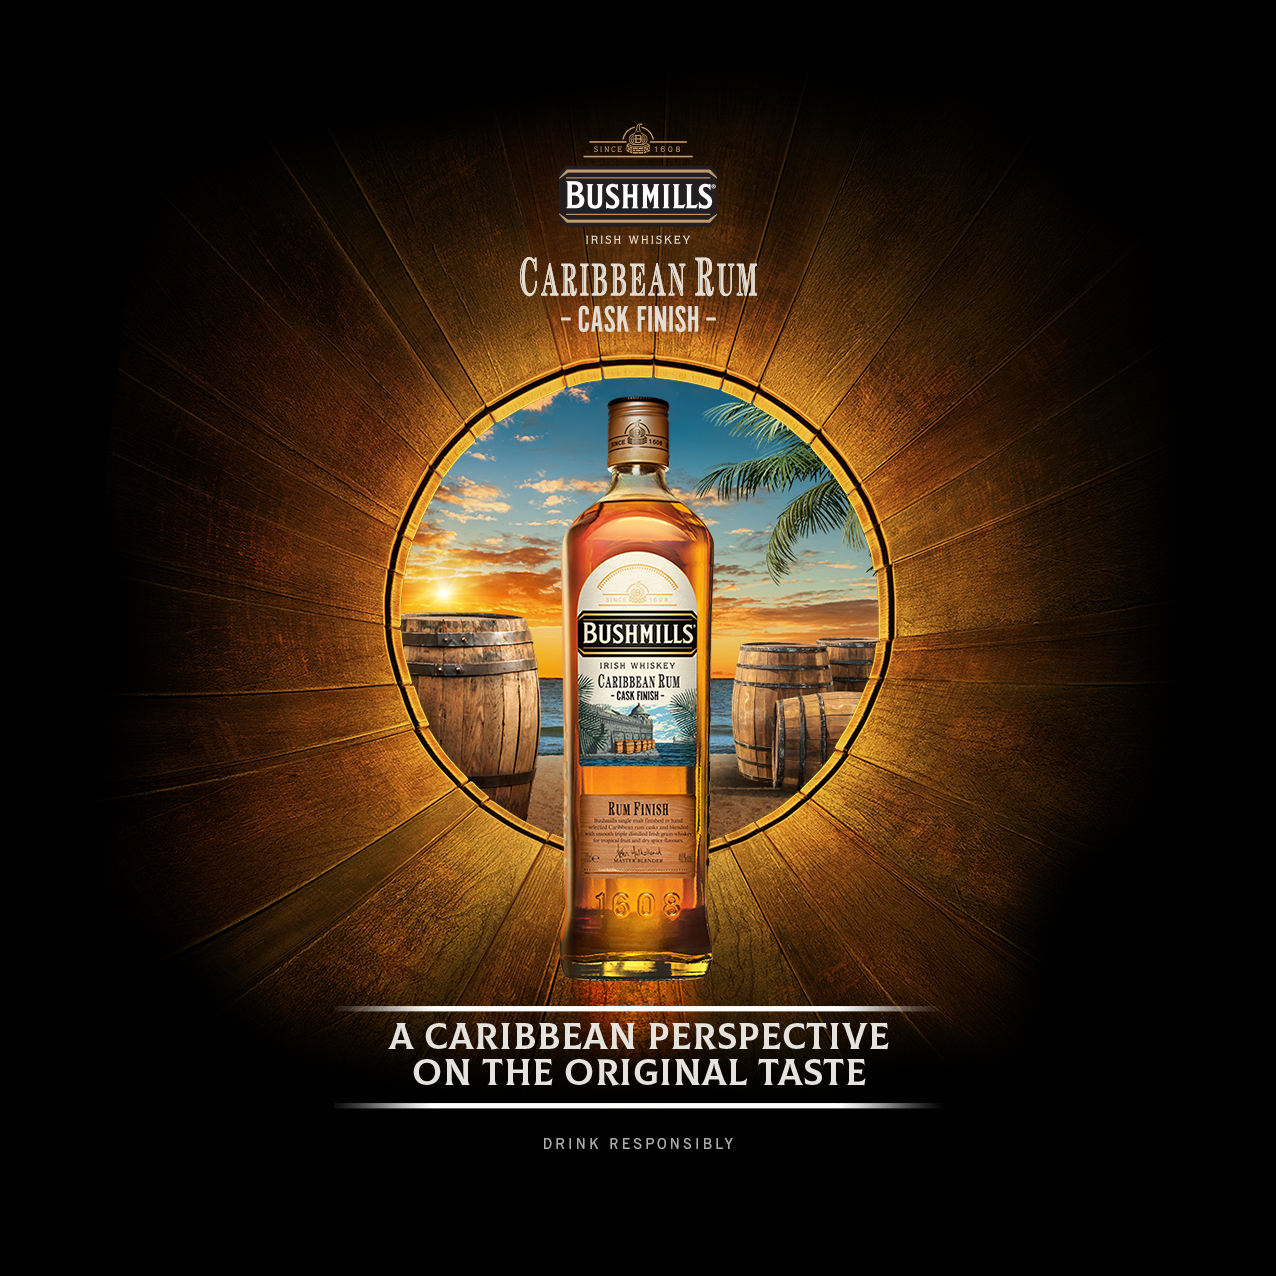 Bushmills Cask Finish is rum-thing a little special for famous distillery